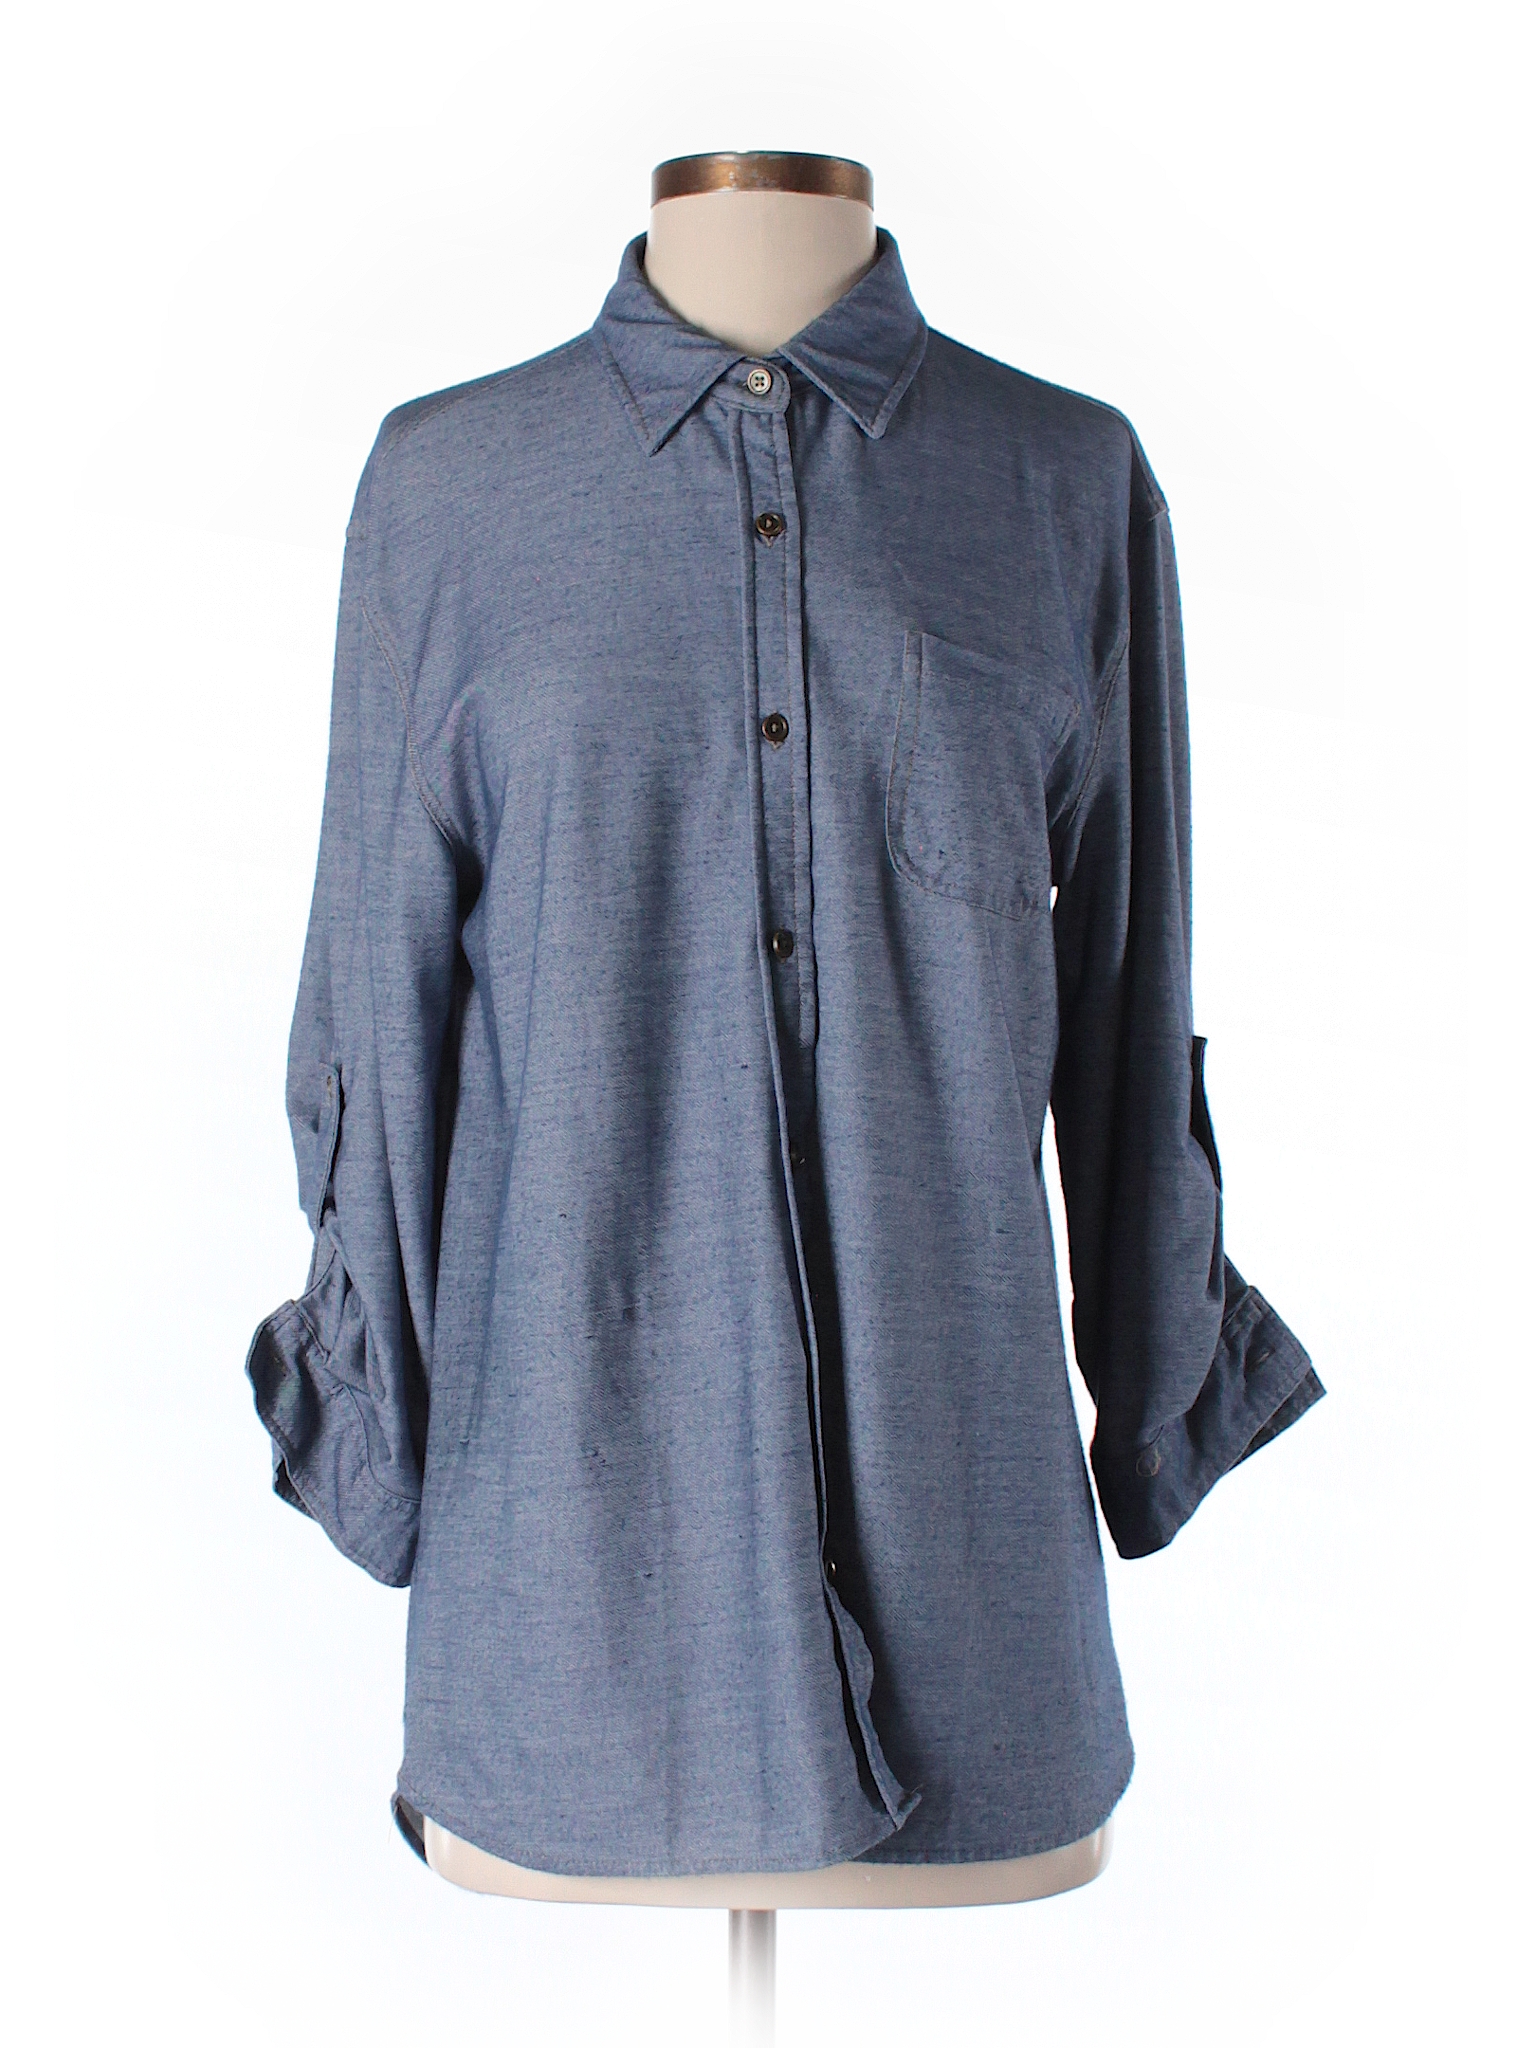 Eden & Olivia Solid Blue 3/4 Sleeve Button-Down Shirt Size M - 71% off ...